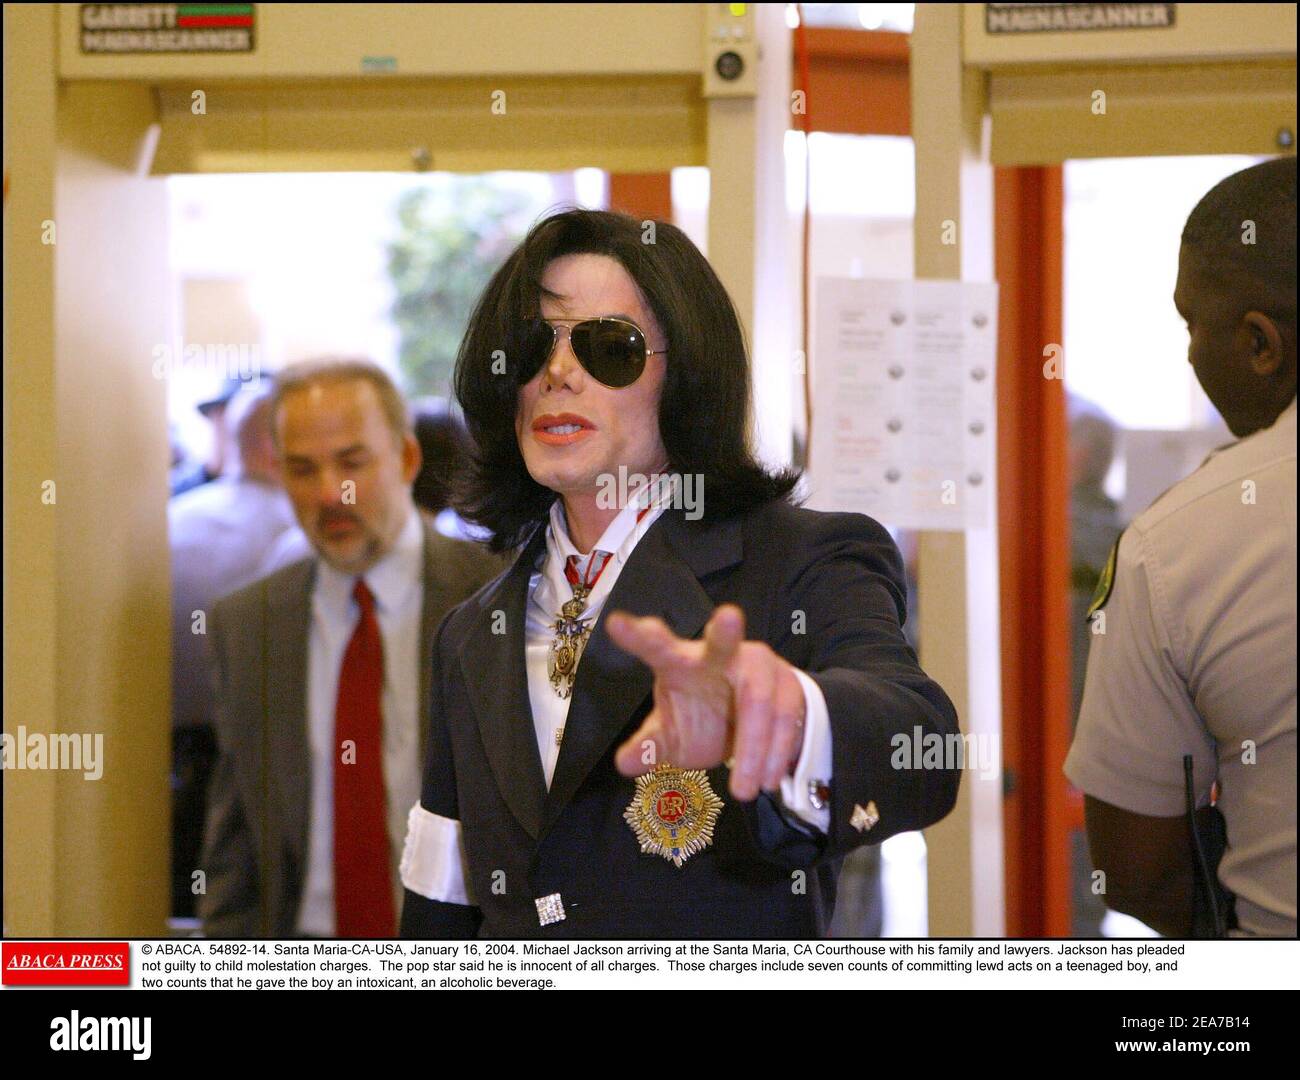 © ABACA. 54892-14. Santa Maria-CA-USA, January 16, 2004. Michael Jackson arriving at the Santa Maria, CA Courthouse with his family and lawyers. Jackson has pleaded not guilty to child molestation charges. The pop star said he is innocent of all charges. Those charges include seven counts of committing lewd acts on a teenaged boy, and two counts that he gave the boy an intoxicant, an alcoholic beverage. Stock Photo